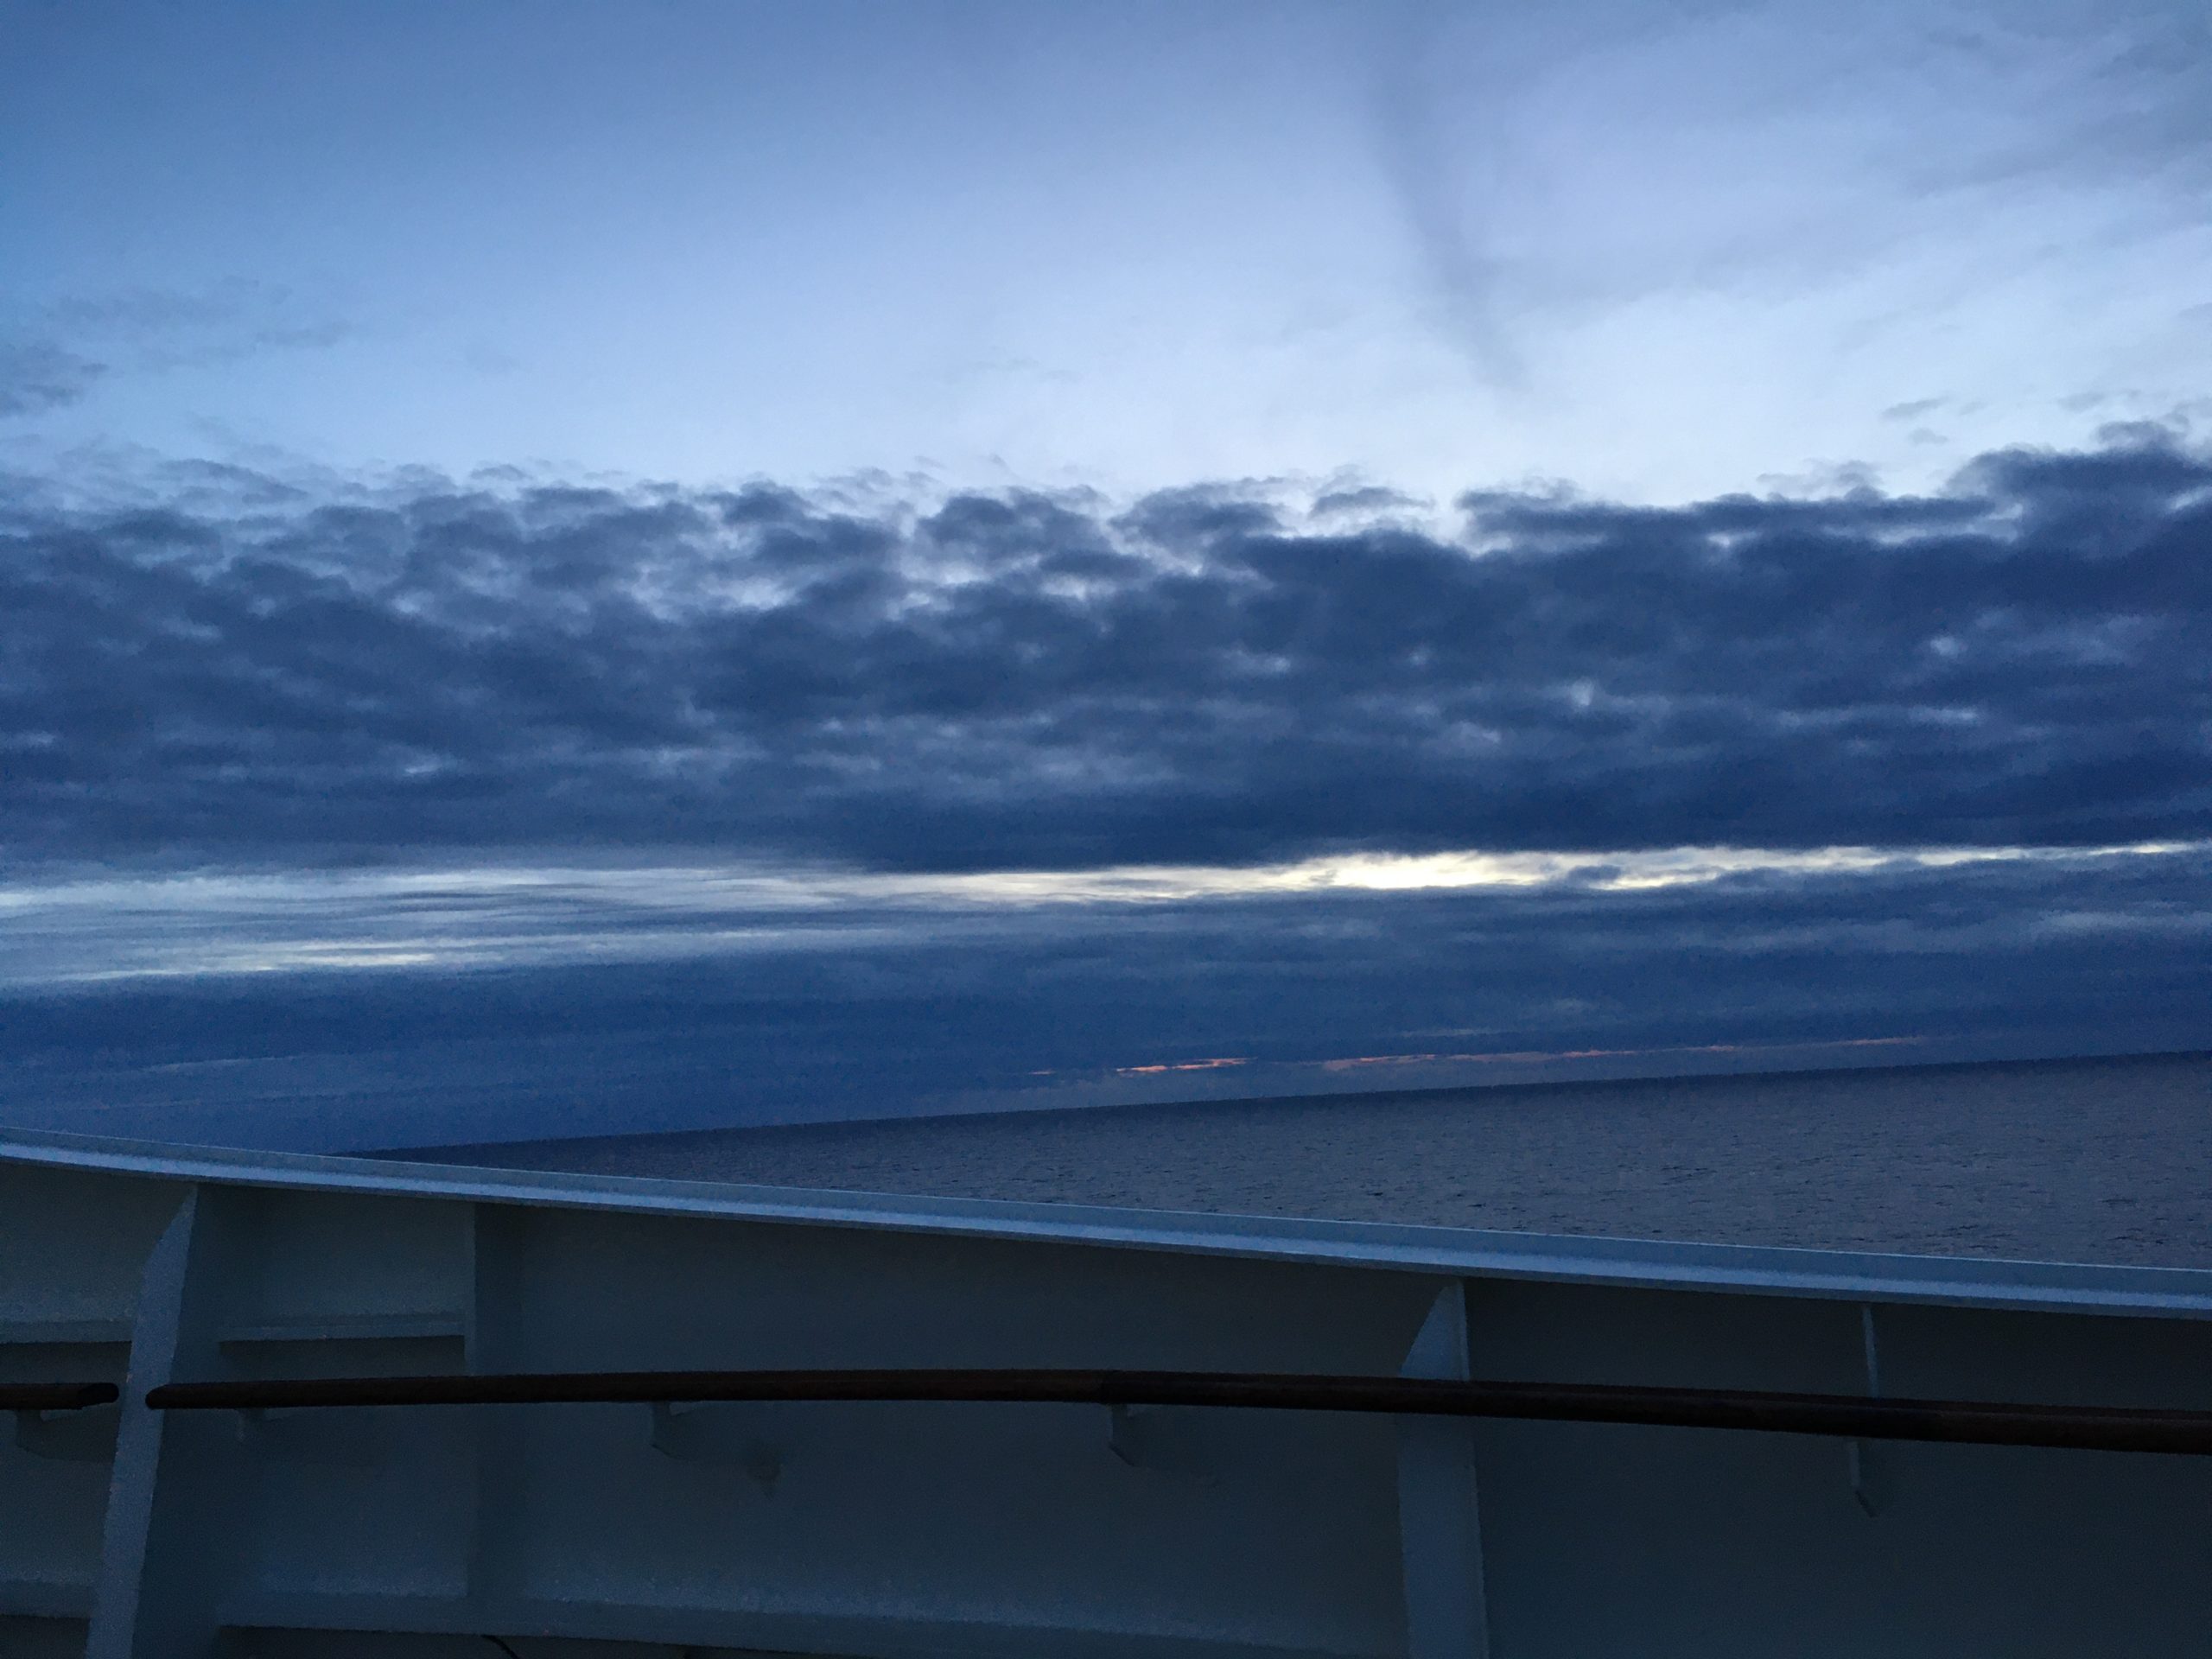 Sky, horizon, sea and QM2 railings attempt to line up at twilight